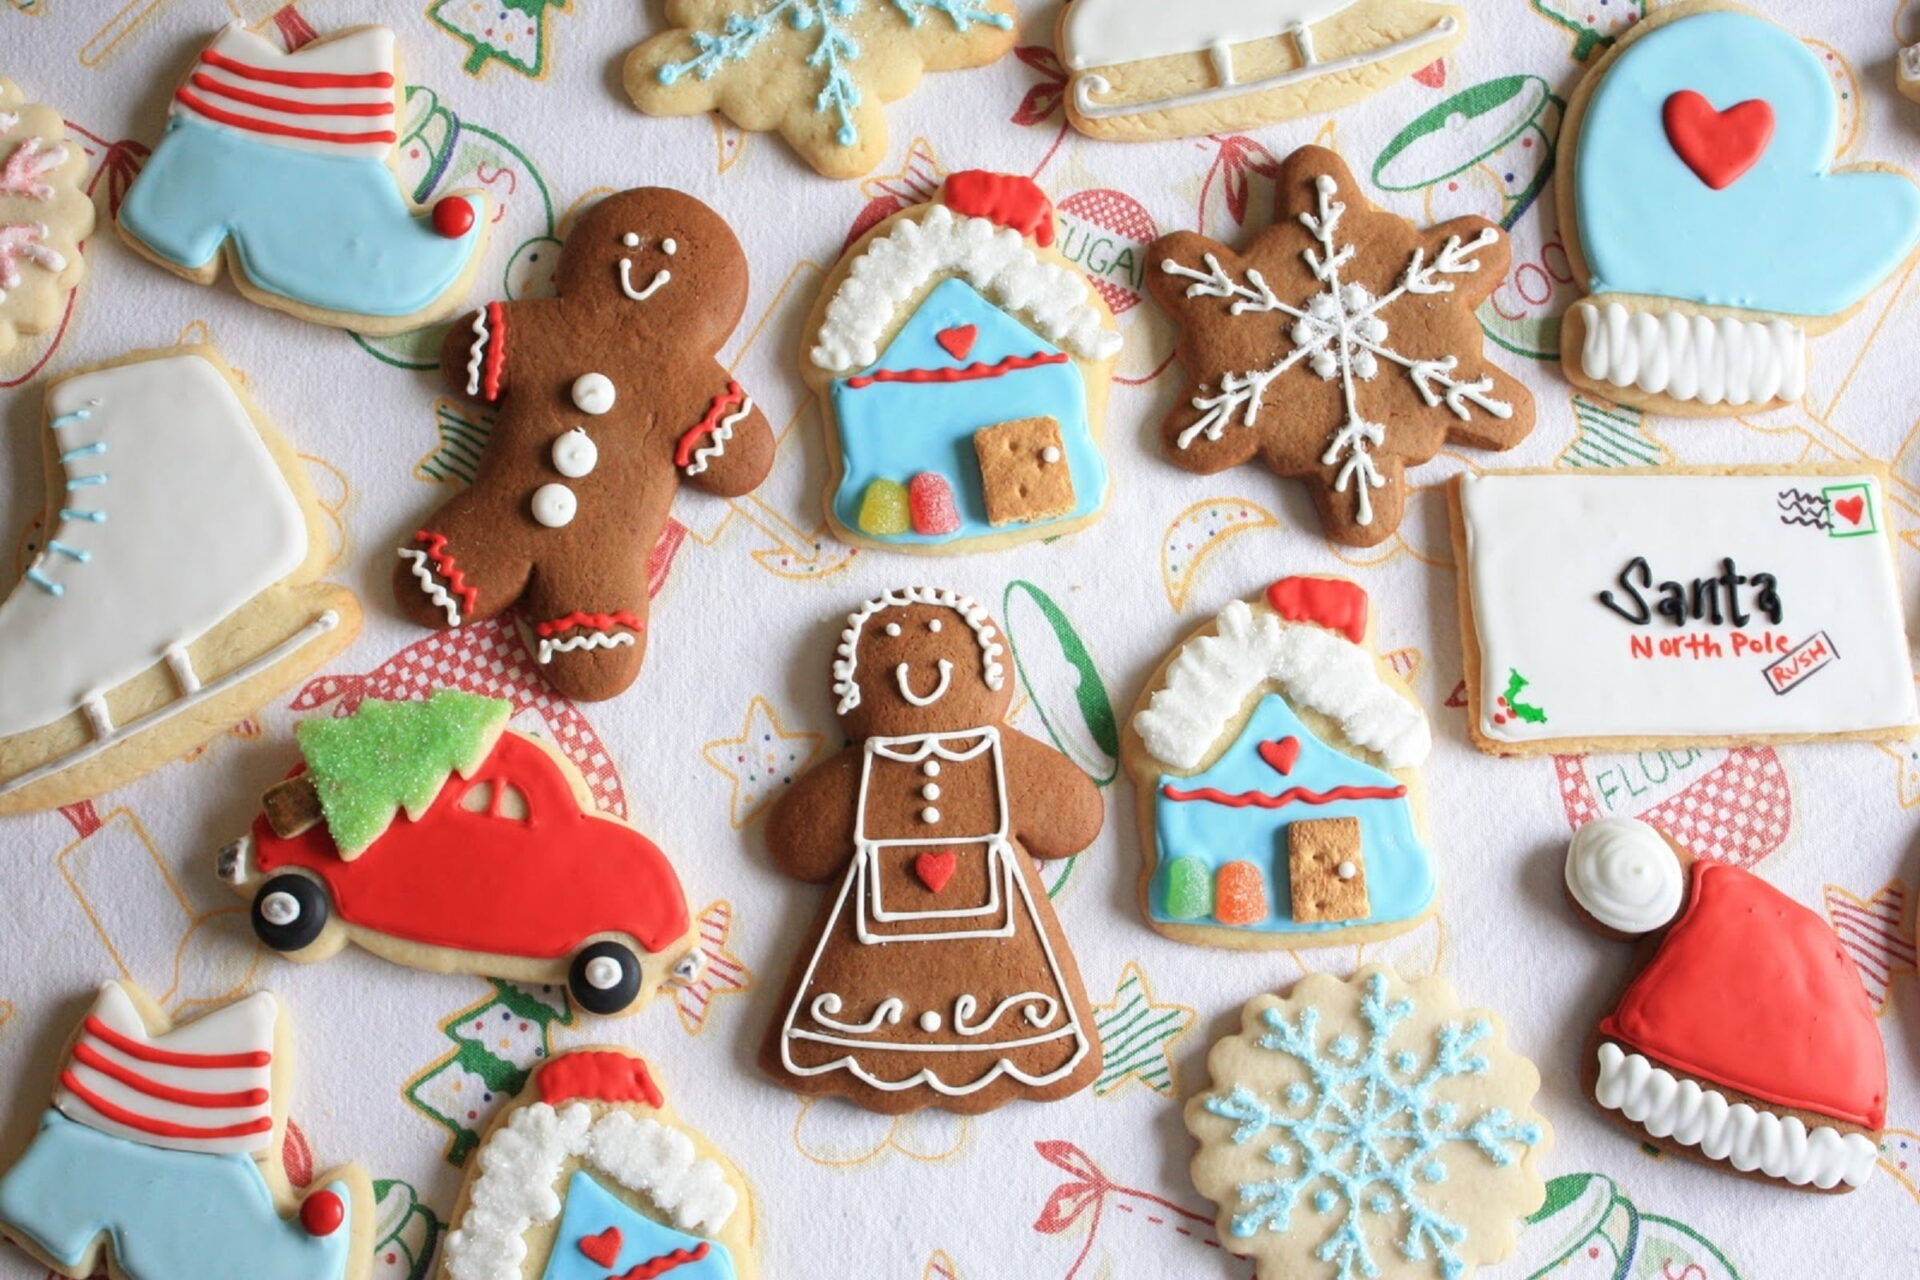 A table of decorated Christmas cookies.